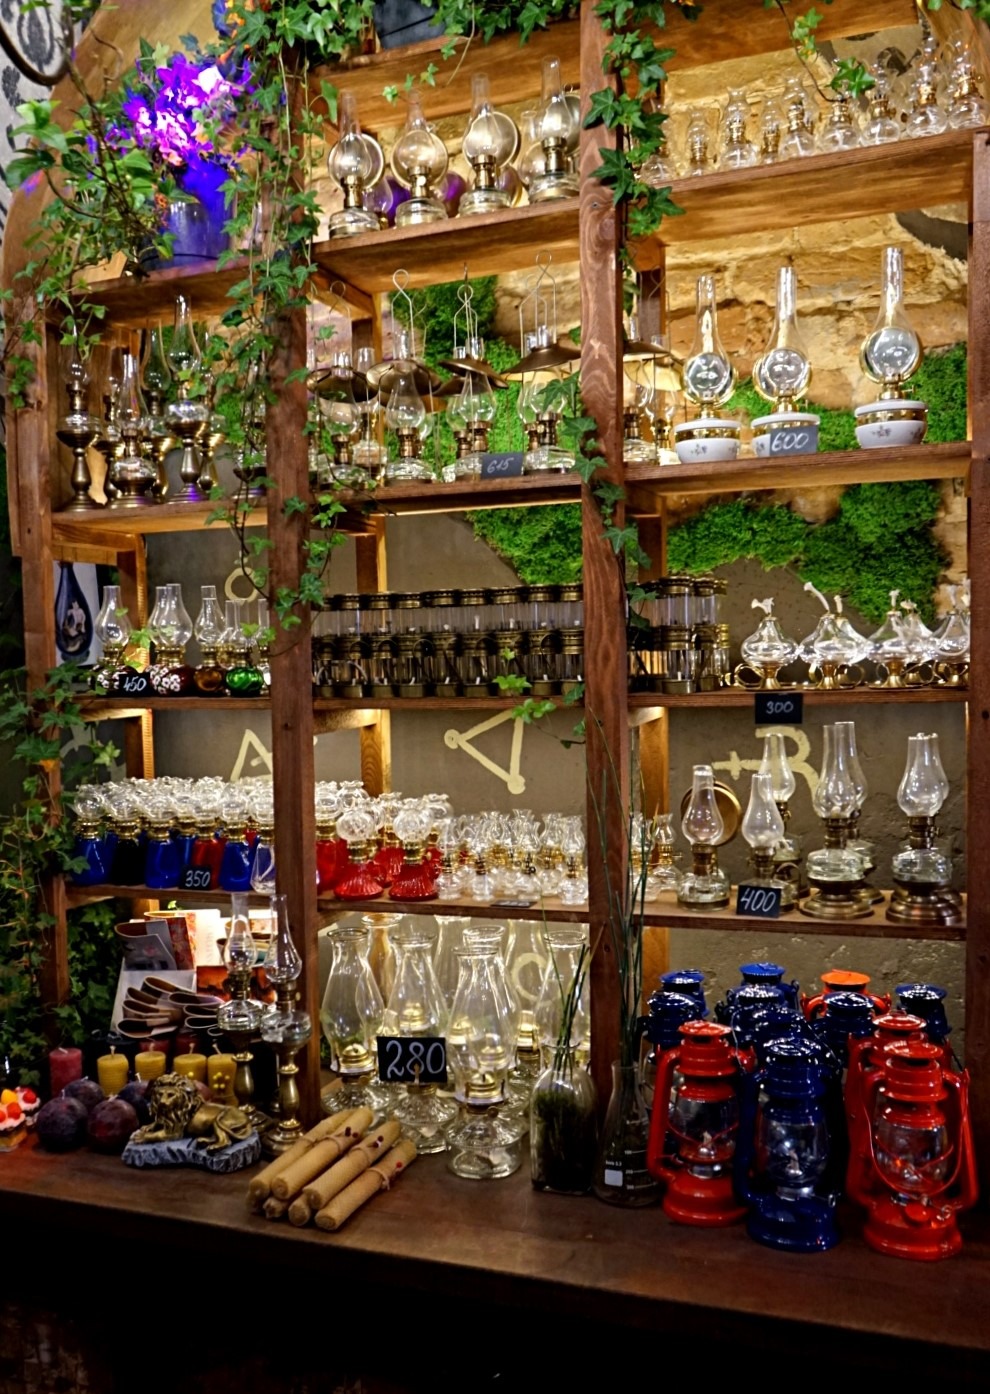 The souvenir store at Galician Alchemy